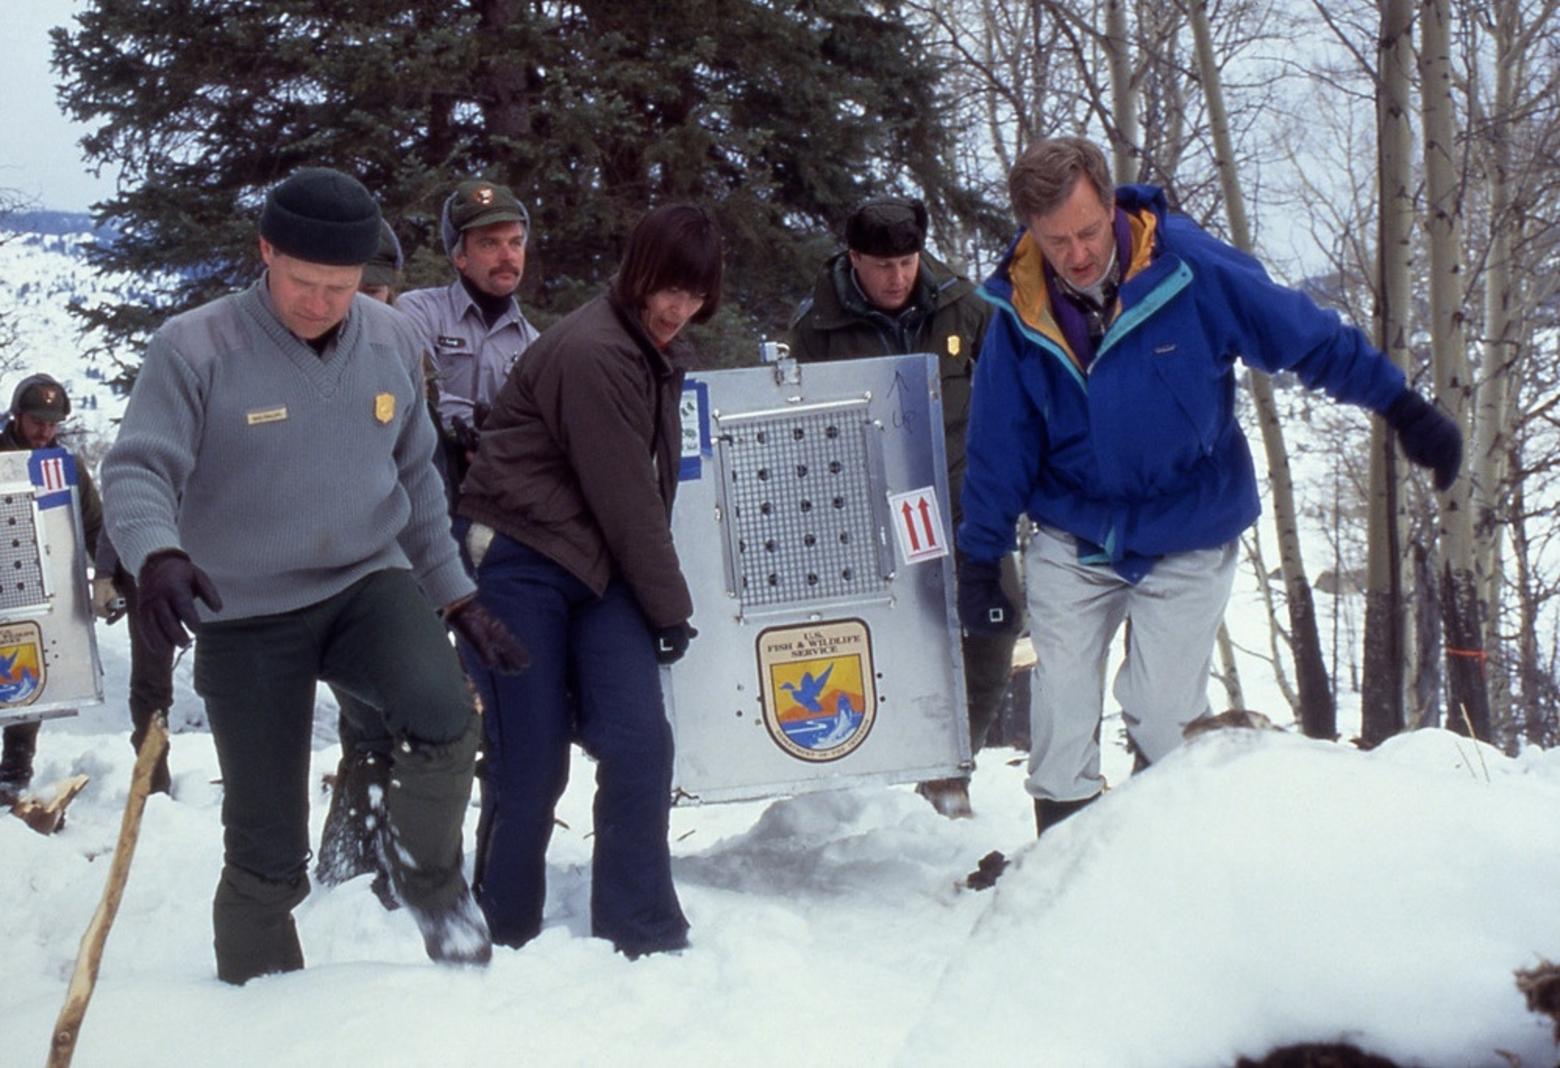 January 12, 1995. The first wolf arrives in Yellowstone National Park at the Crystal Bench Pen (Mike Phillips - YNP Wolf Project Leader, Jim Evanoff - YNP, Molly Beattie - USFWS Director, Mike Finley - YNP Superintendent, Bruce Babbitt - Secretary of Interior). Photo by Jim Peaco/NPS